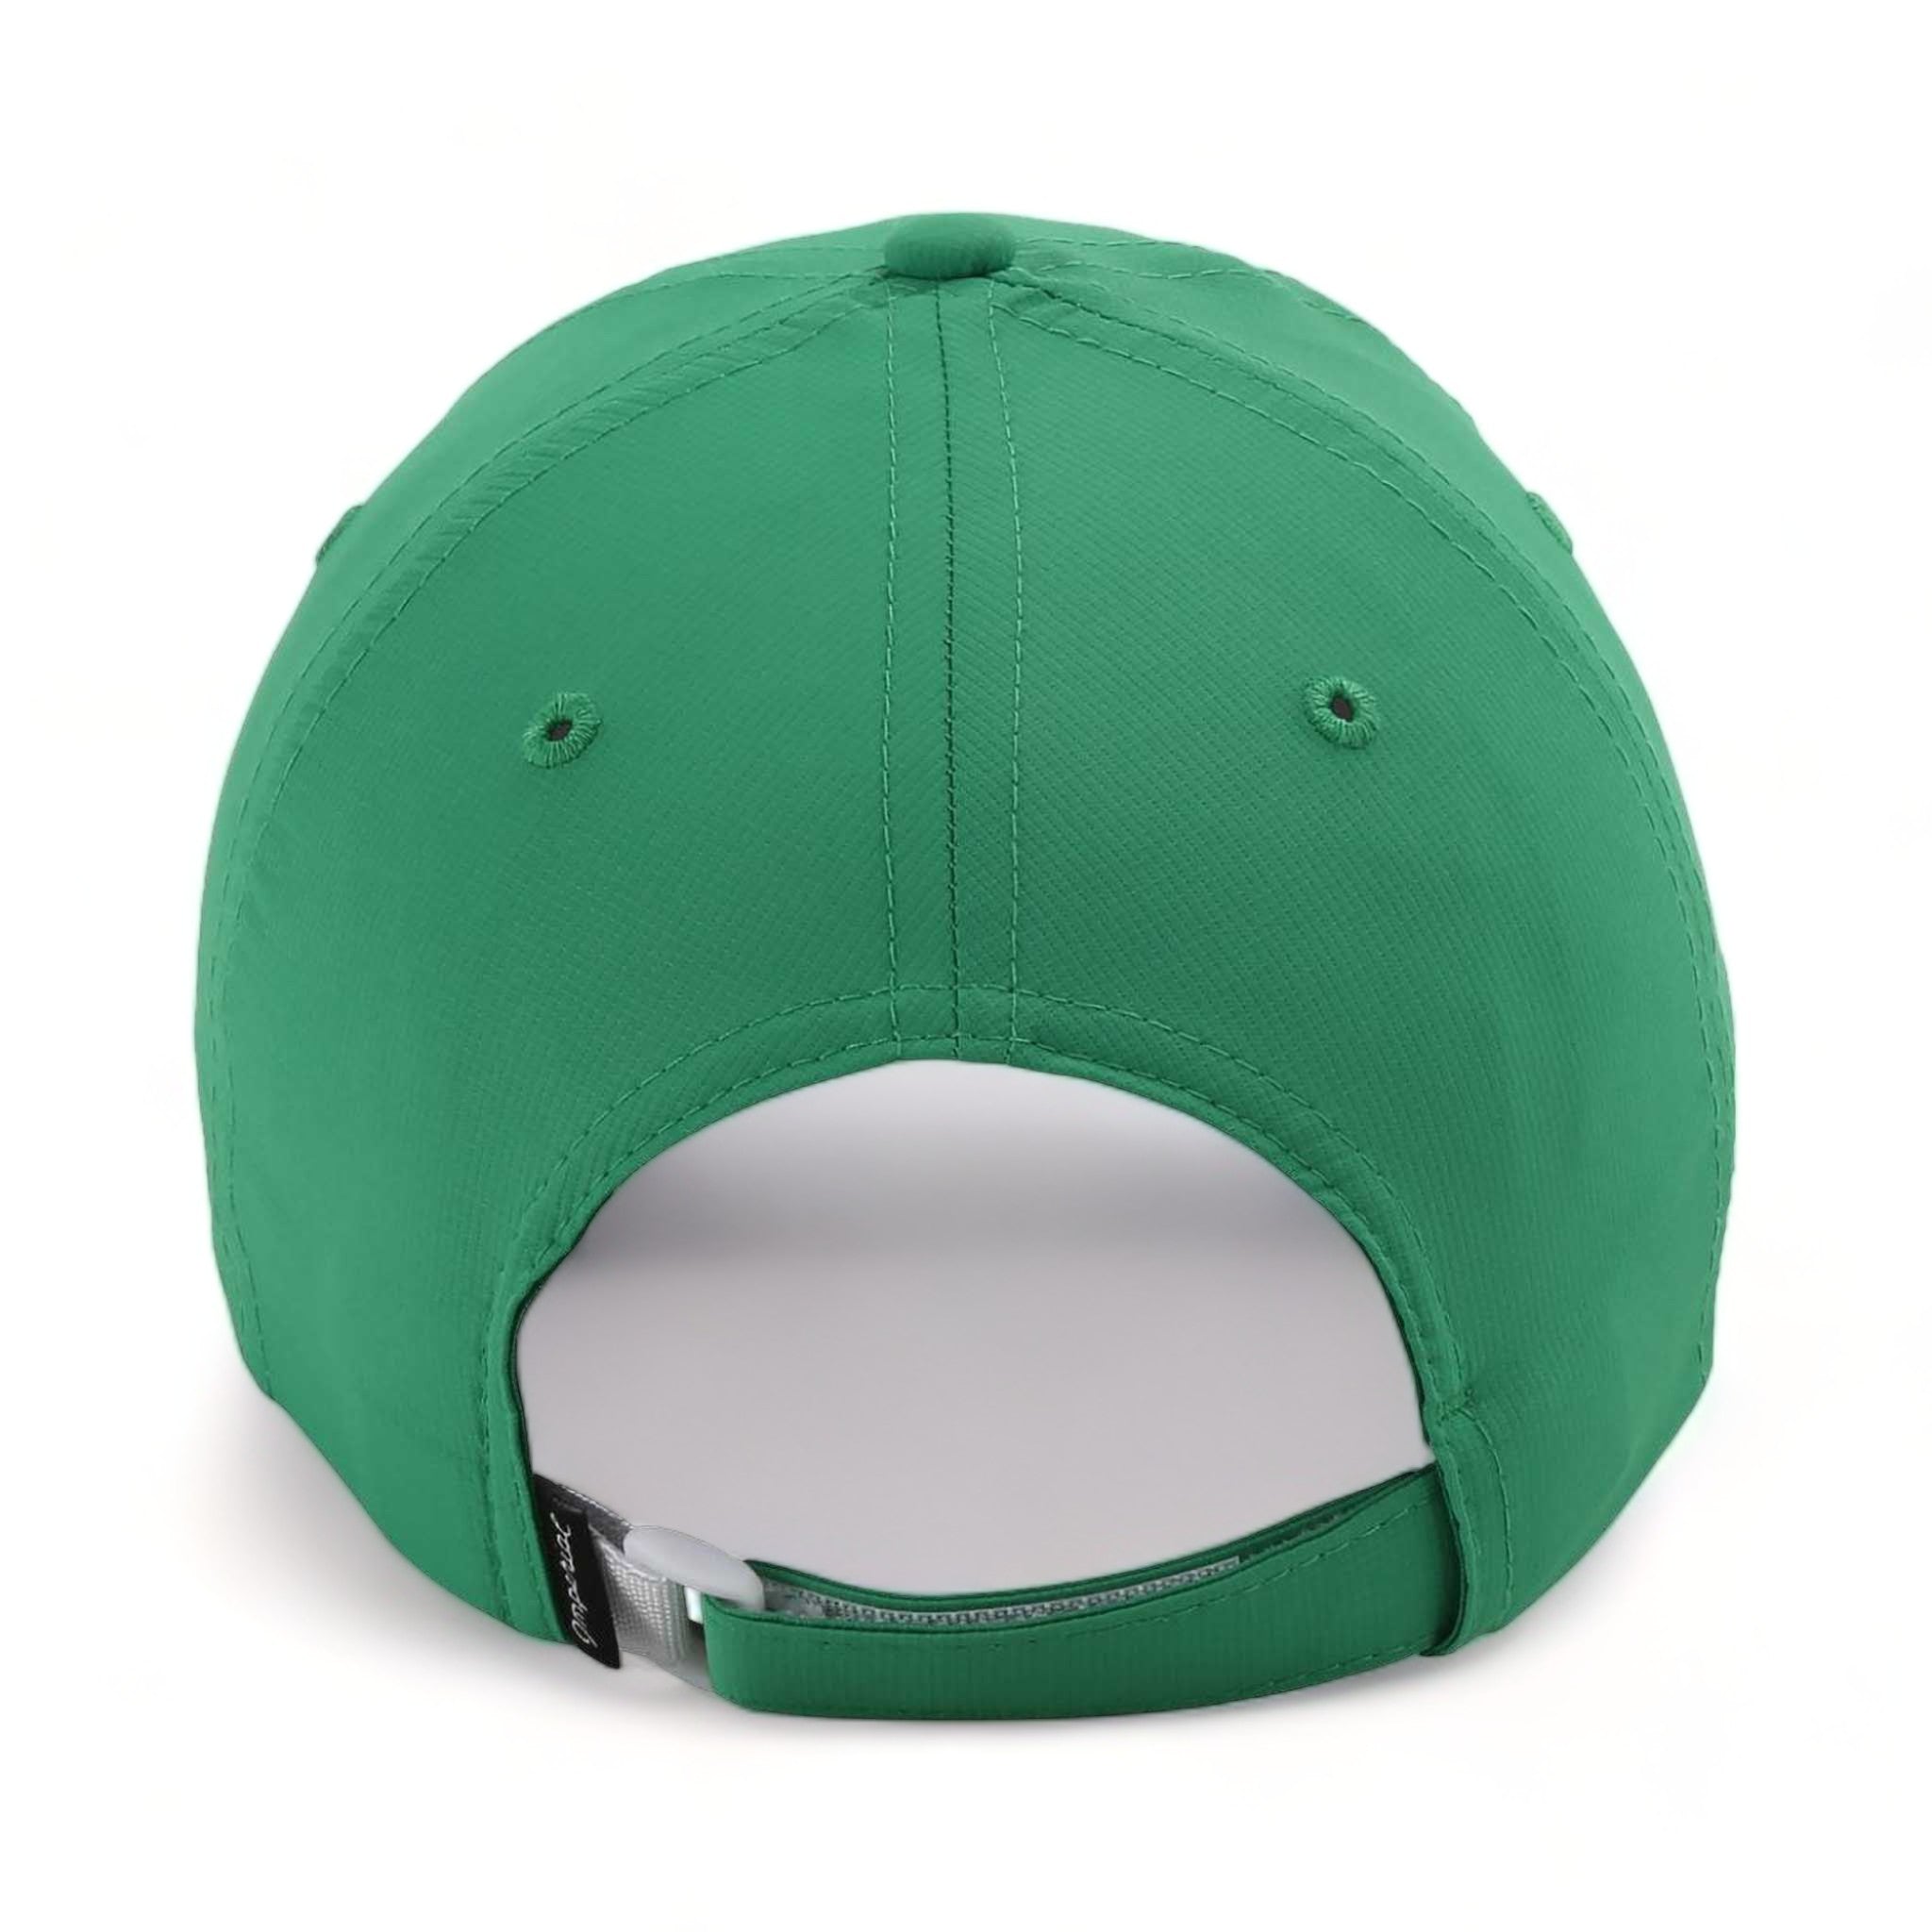 Back view of Imperial X210P custom hat in green